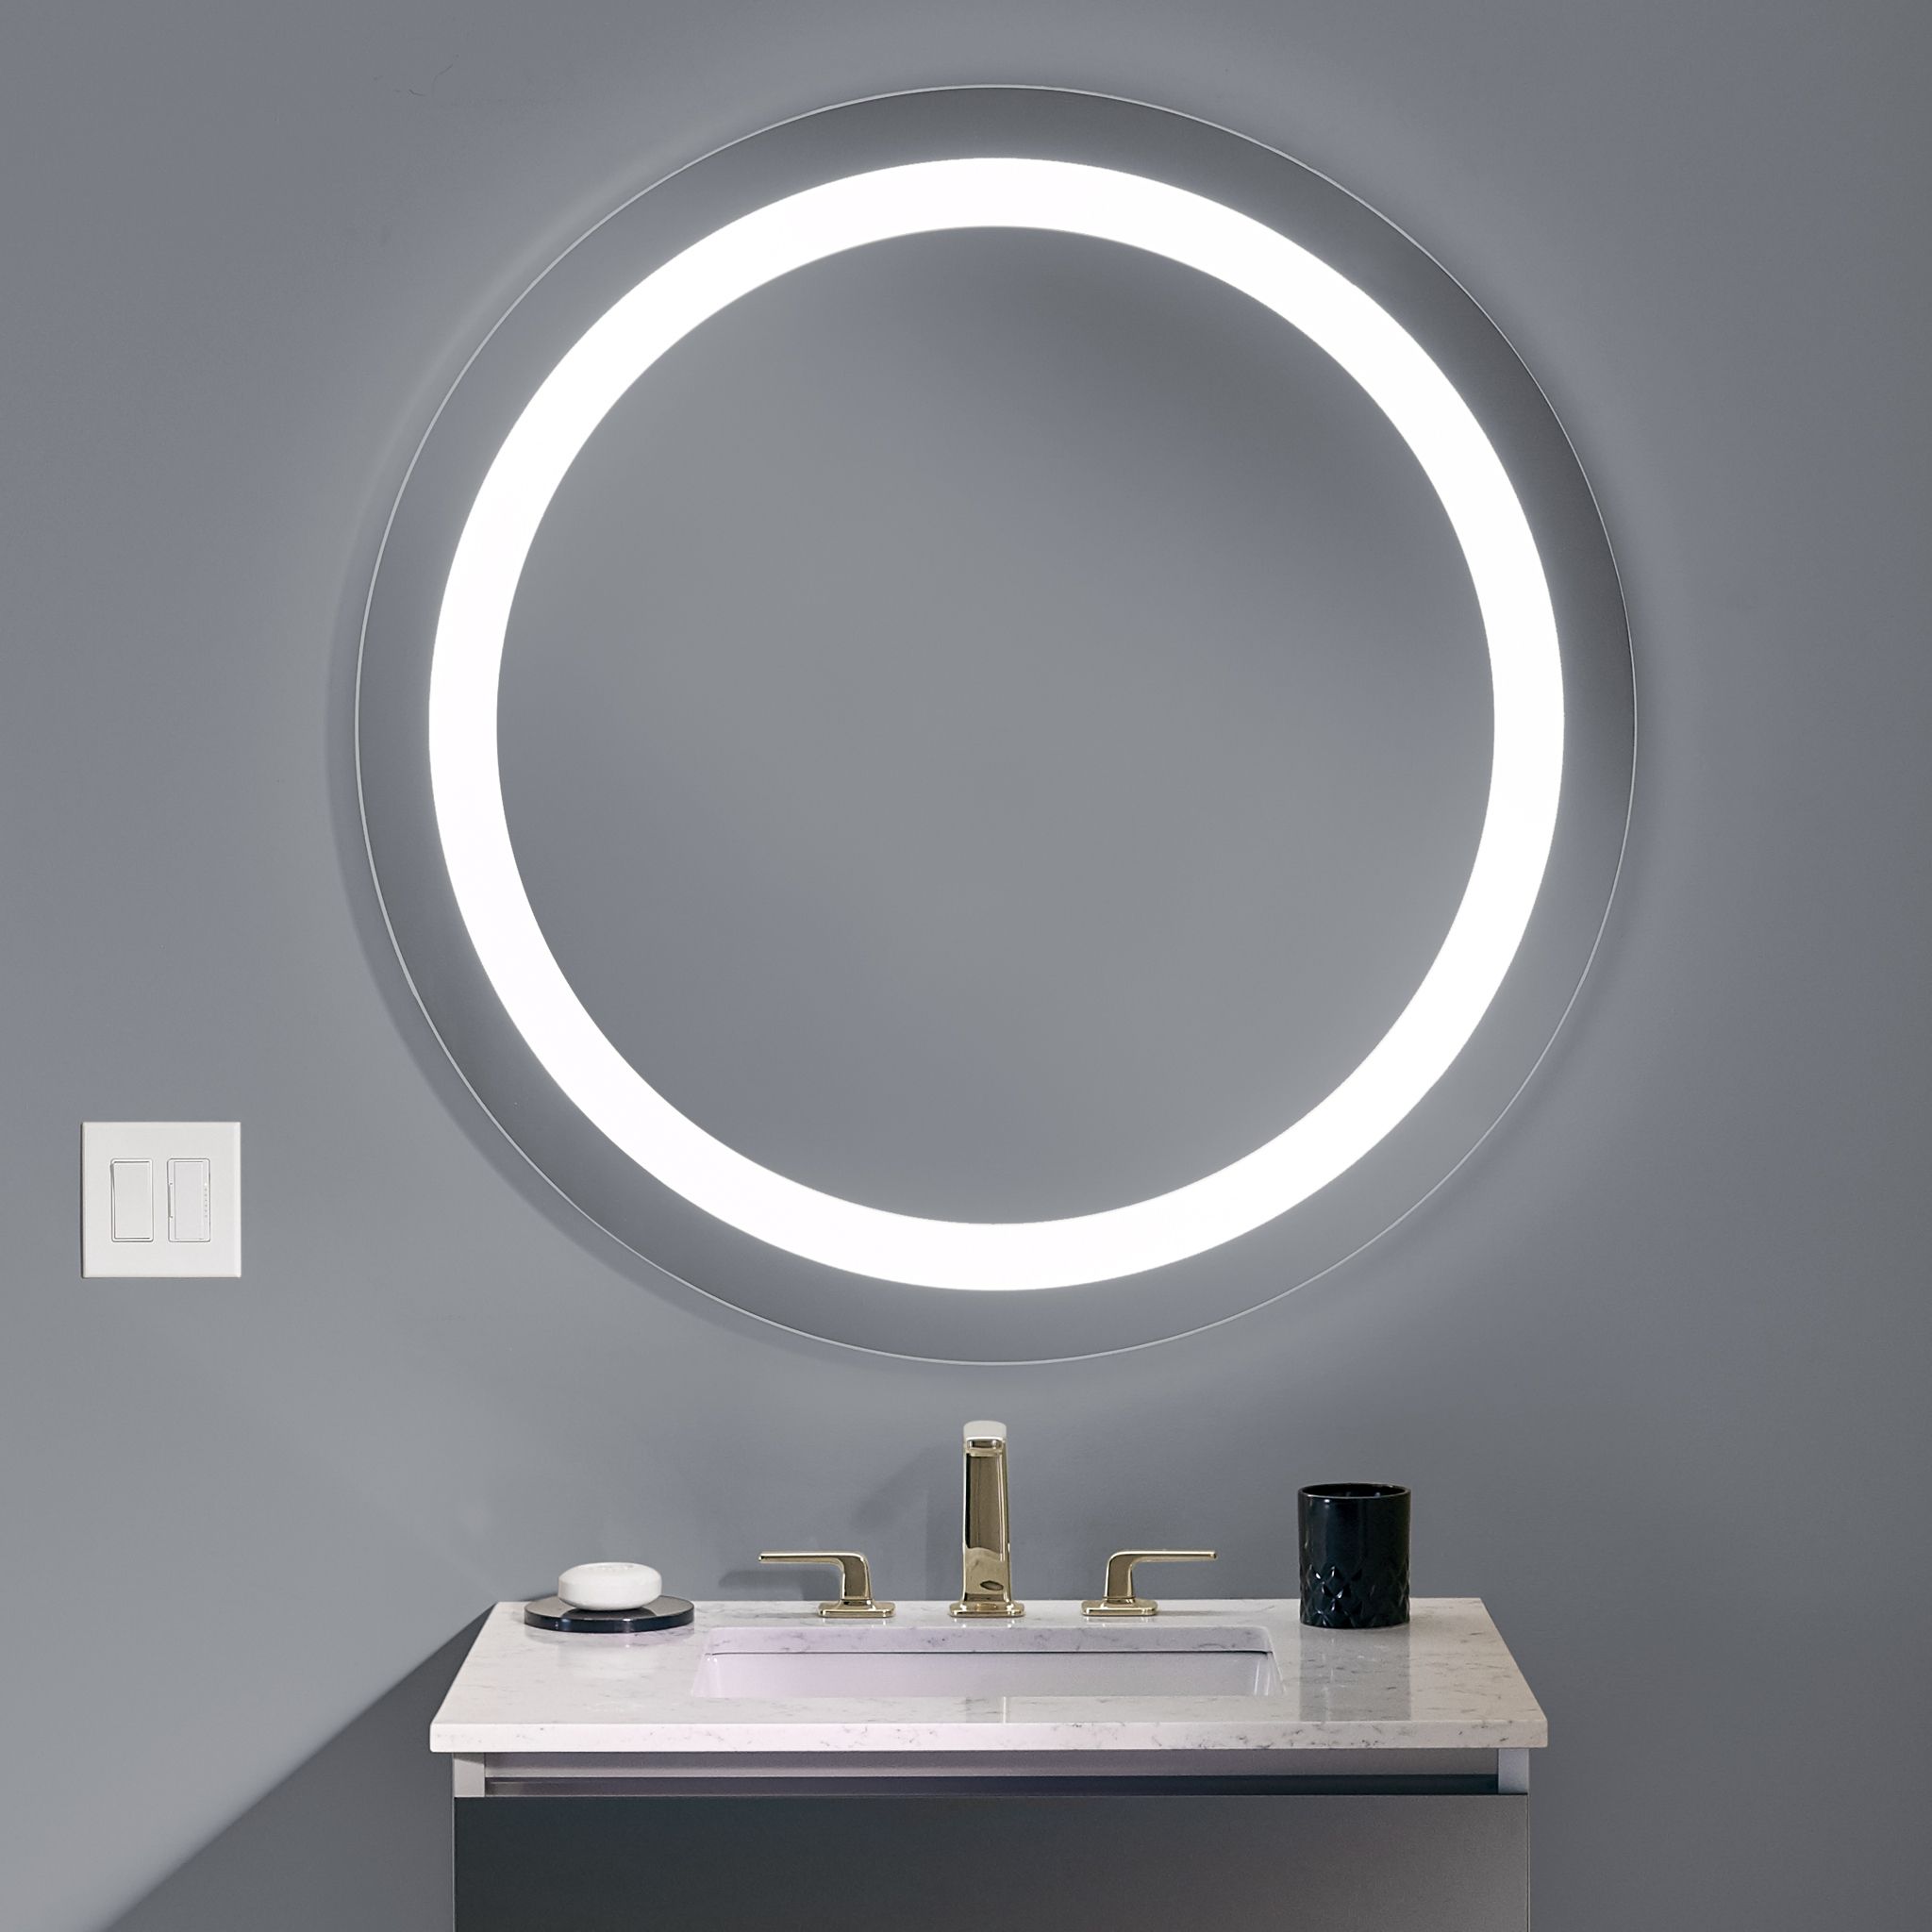 Standard Wall Mirrors Throughout Most Up To Date Bathroom Mirrors (View 7 of 20)